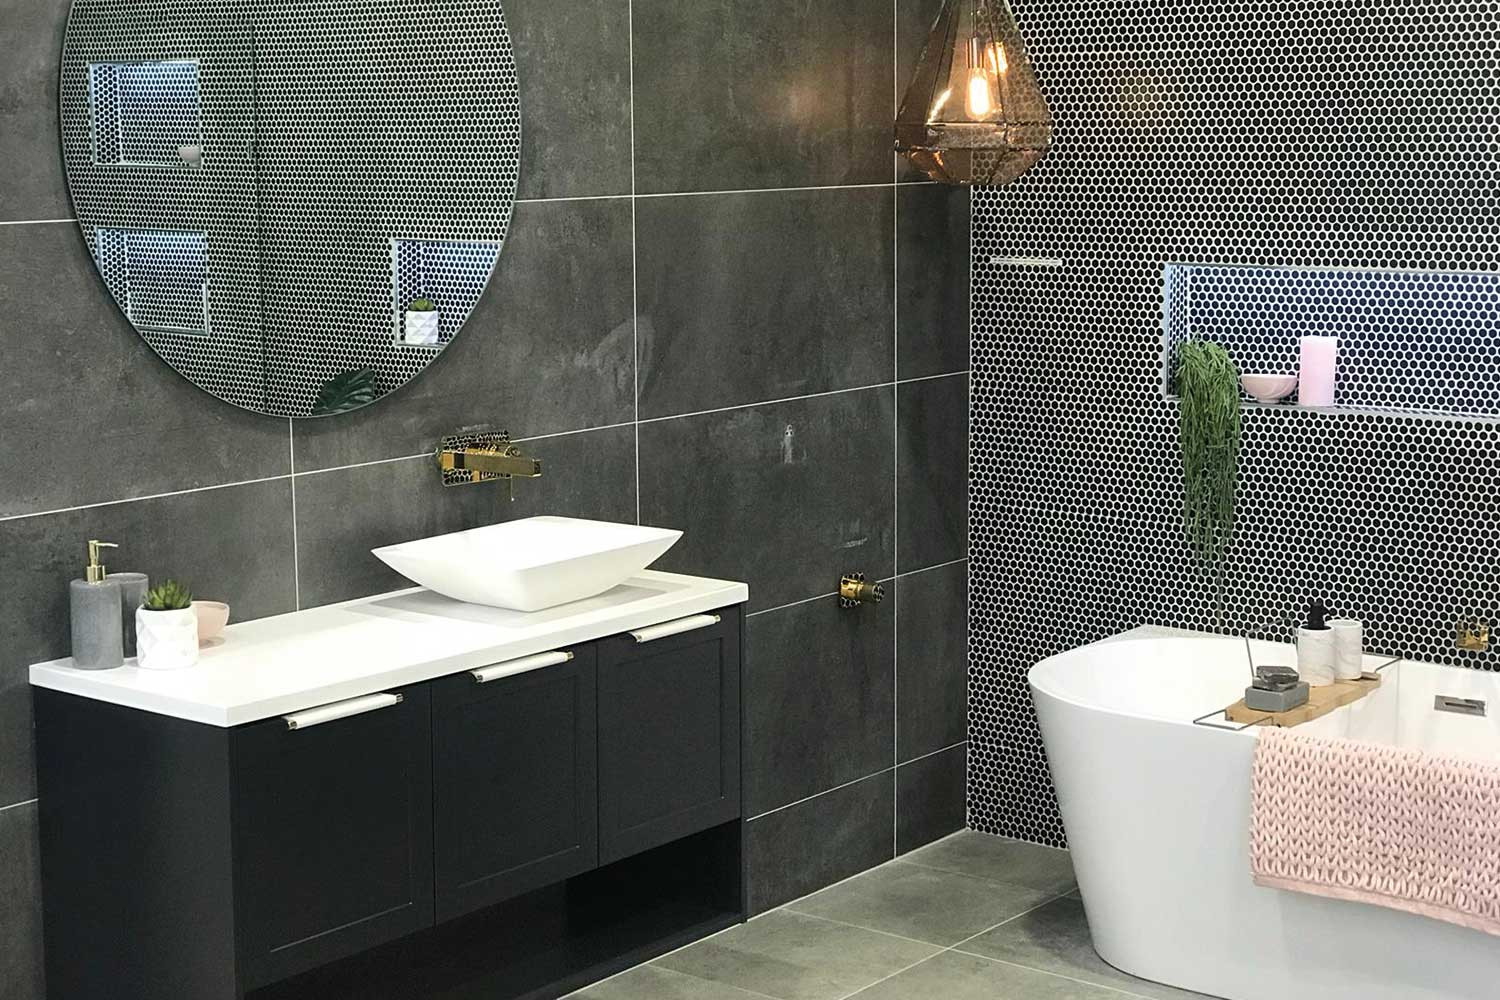 Bathroom Design Images
 The latest modern bathroom designs to add luxe on a bud